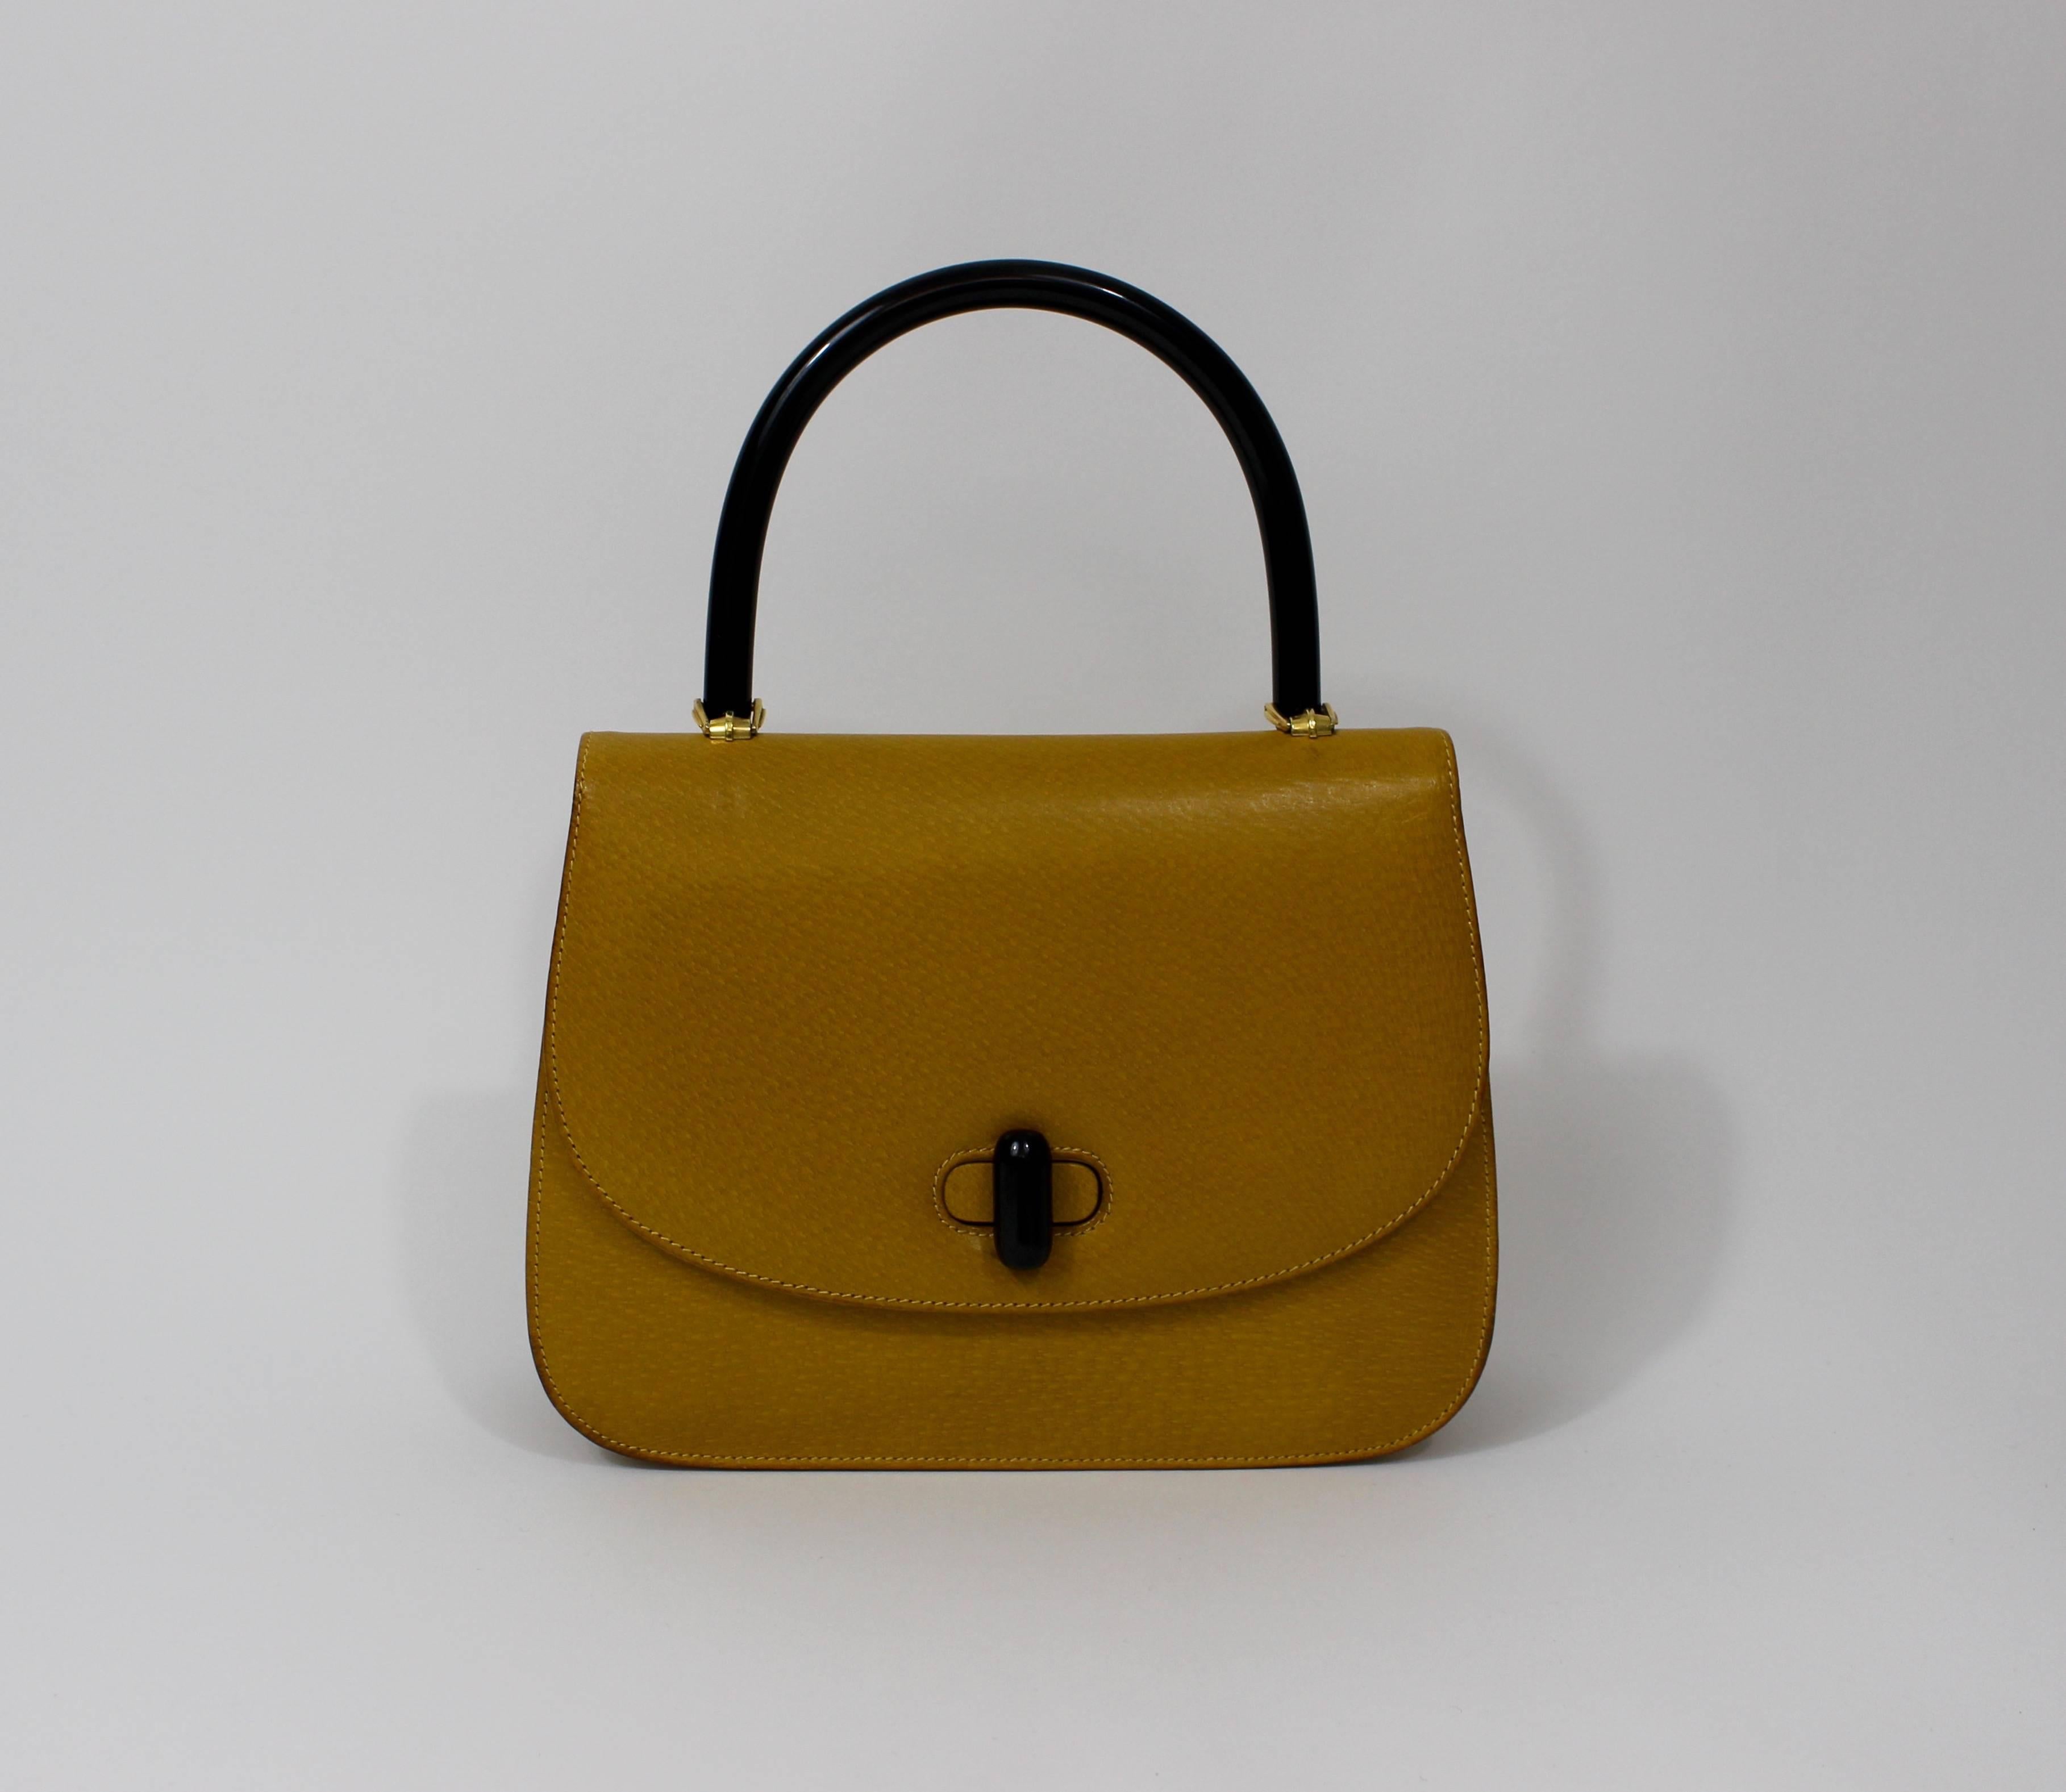 A 1960s Gucci purse in  mustard yellow leather with black bakelite  top handle and clasp. 
Gold tone metal hardware. 
Golden 